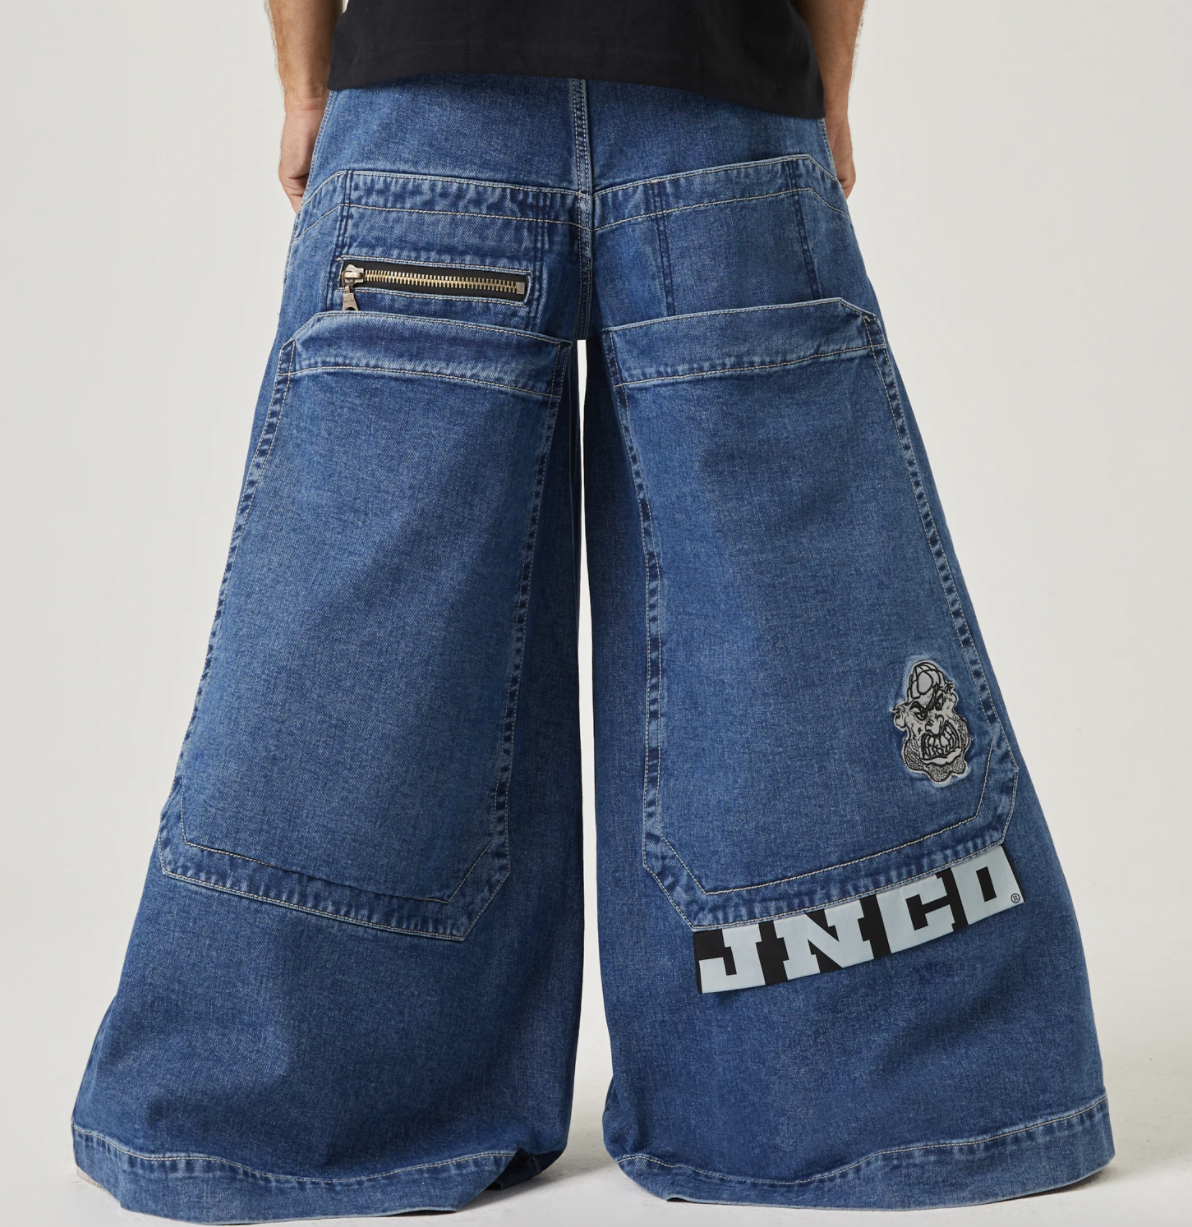 pair of JNCO jeans